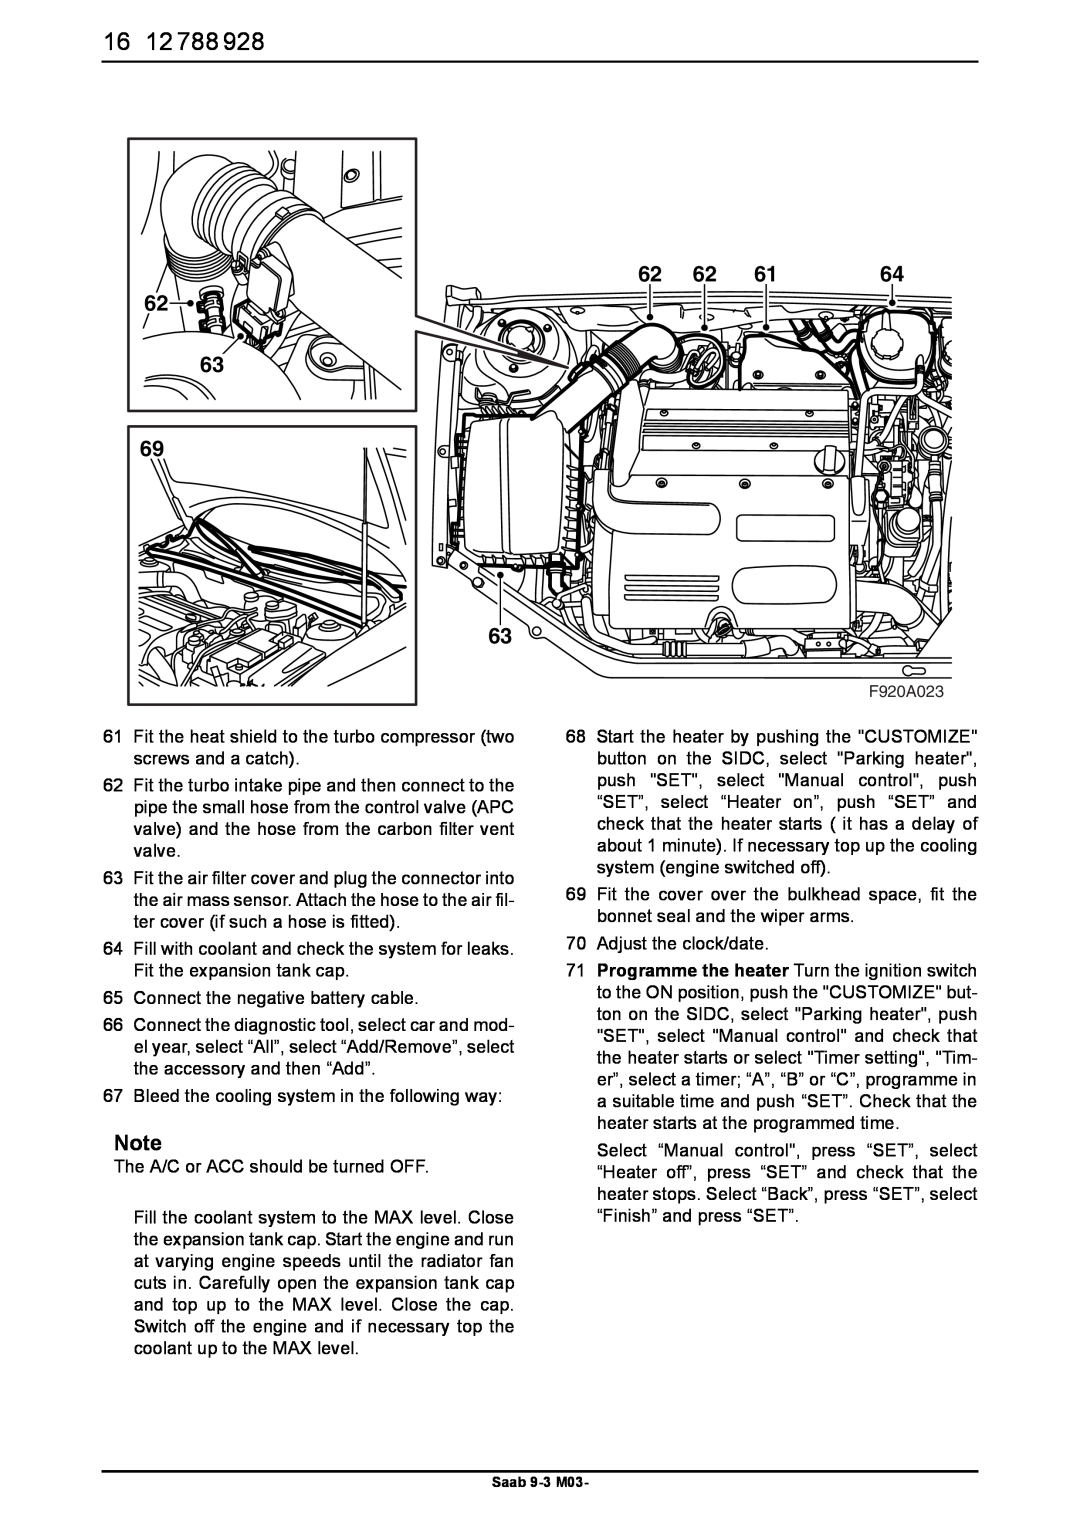 Saab 9-3 M03 installation instructions 65Connect the negative battery cable 